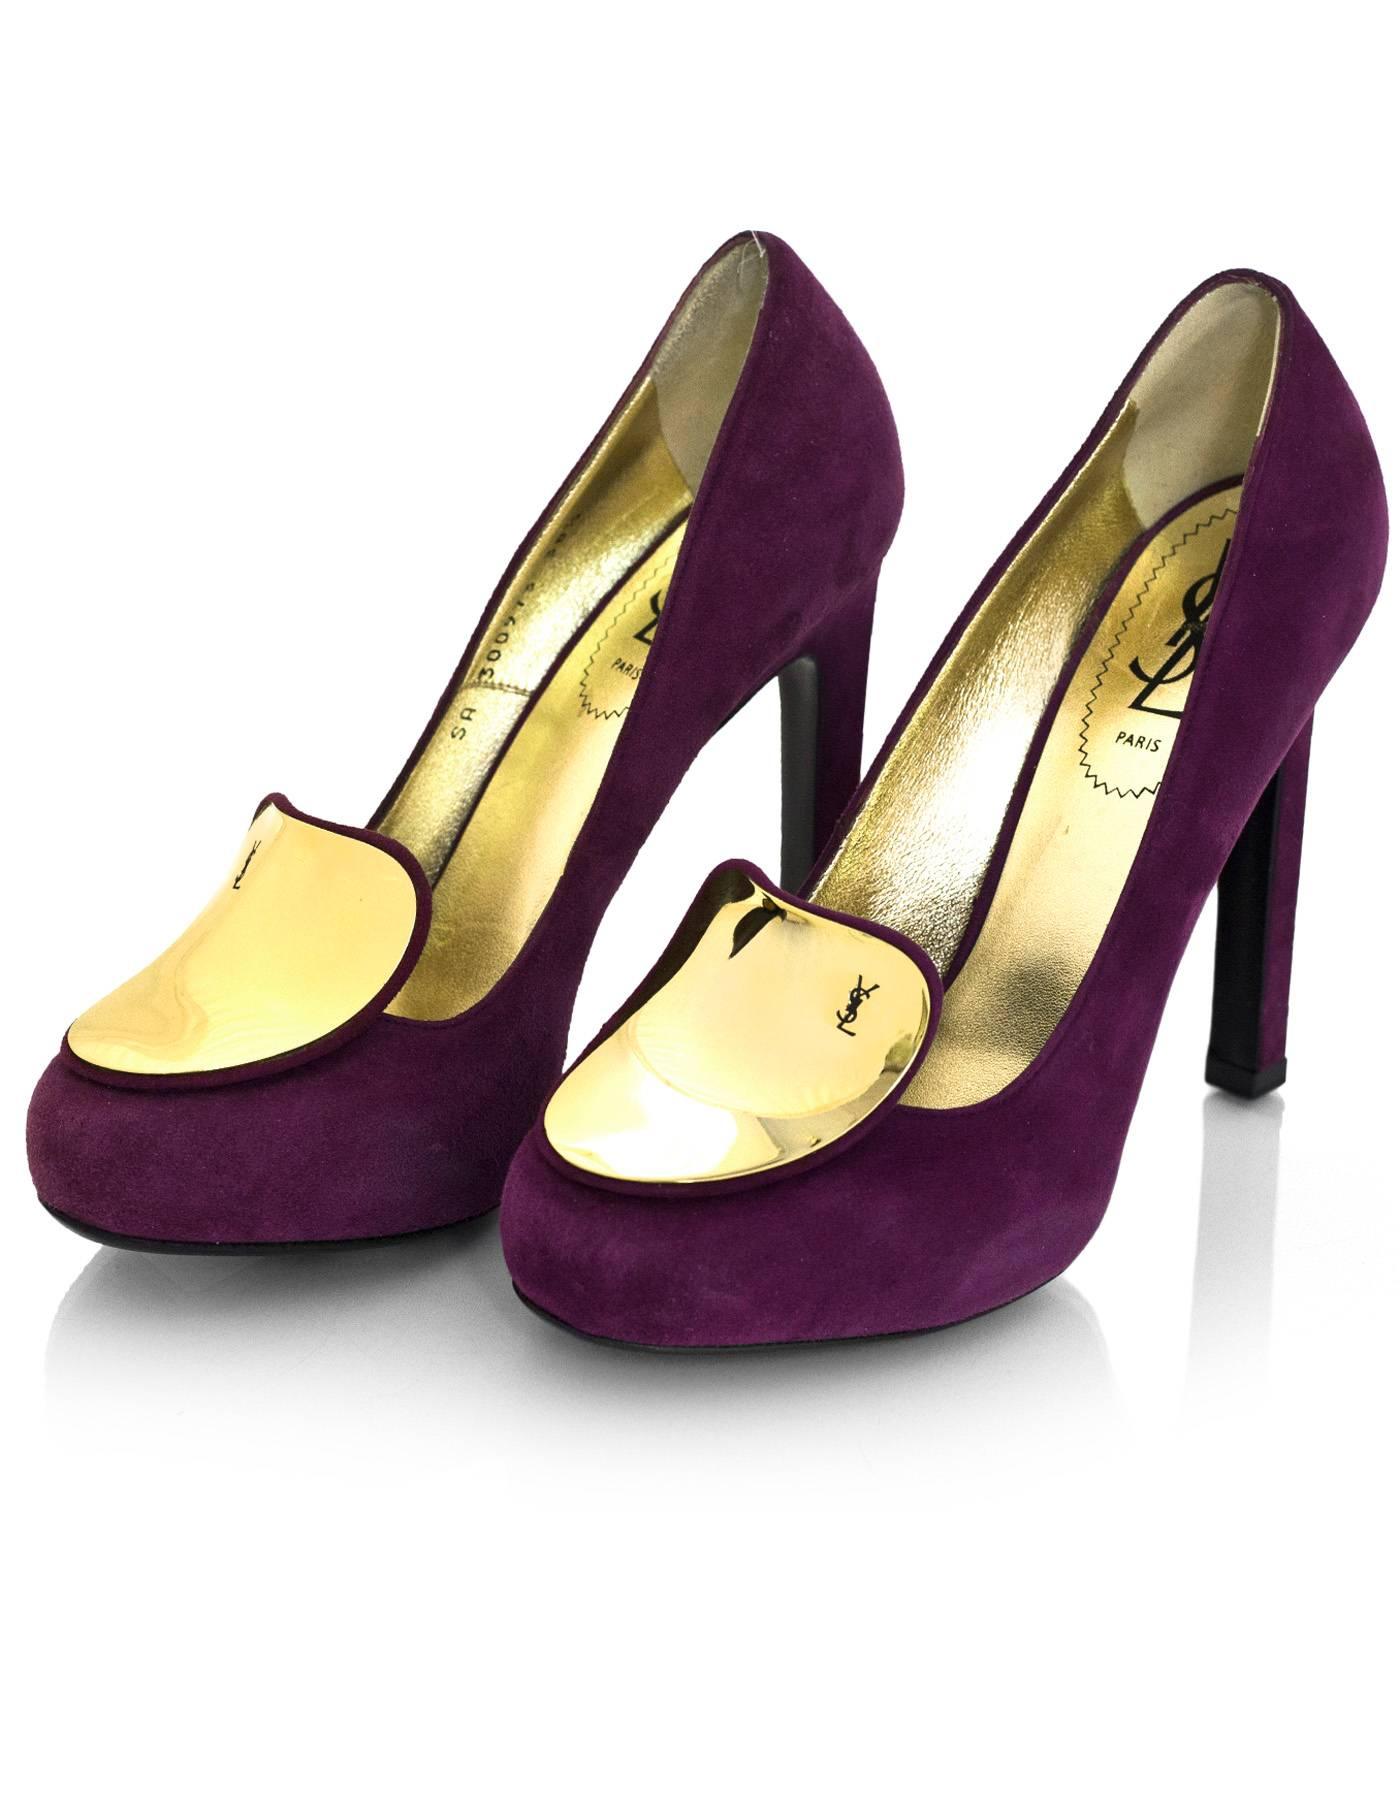 YSL Purple Suede & Goldtone Tongue Pumps Sz 38.5

Made In: Italy
Color: Purple, gold
Materials: Suede, metal
Closure/Opening: Slide on
Sole Stamp: Yves Saint Laurent Made in Italy 38.5
Retail Price: $895 + tax
Overall Condition: Excellent pre-owned